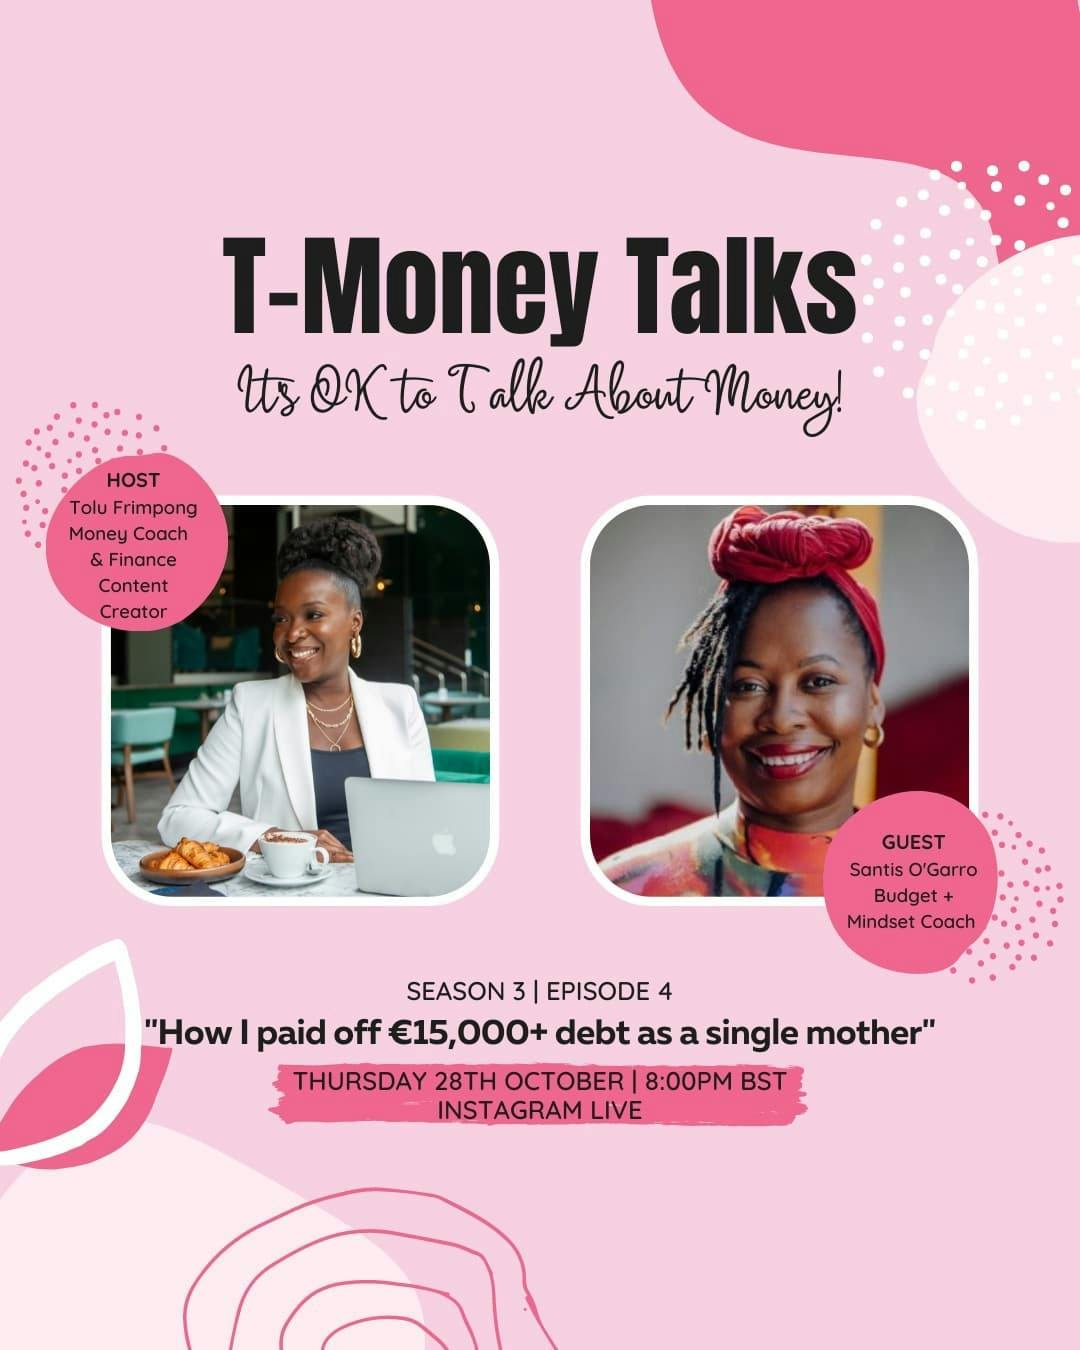 I'm pleased to announce that I'll be joined tomorrow by Santis O'Garro-l, Budget + Mindset Coach. @thecaribbeandub

After having a lifestyle overhaul, by clearing €15027/in debt as a single mother, she decided to serve others by becoming a coach. 

Join us tomorrow at 8pm to deleve into Santis' inspiring debt free story.

Turn your reminders on so that you don't miss this inspiring episode.

#tmoneytalks #instagramlive  #ukdebtfreecommunity #debtfreecommunityuk #debtfreeuk #debtfree #debtfreejourney  #journeytofinancialIndependence  #FinancialIndependence #personalfinanceuk  #journeytofinancialfreedom